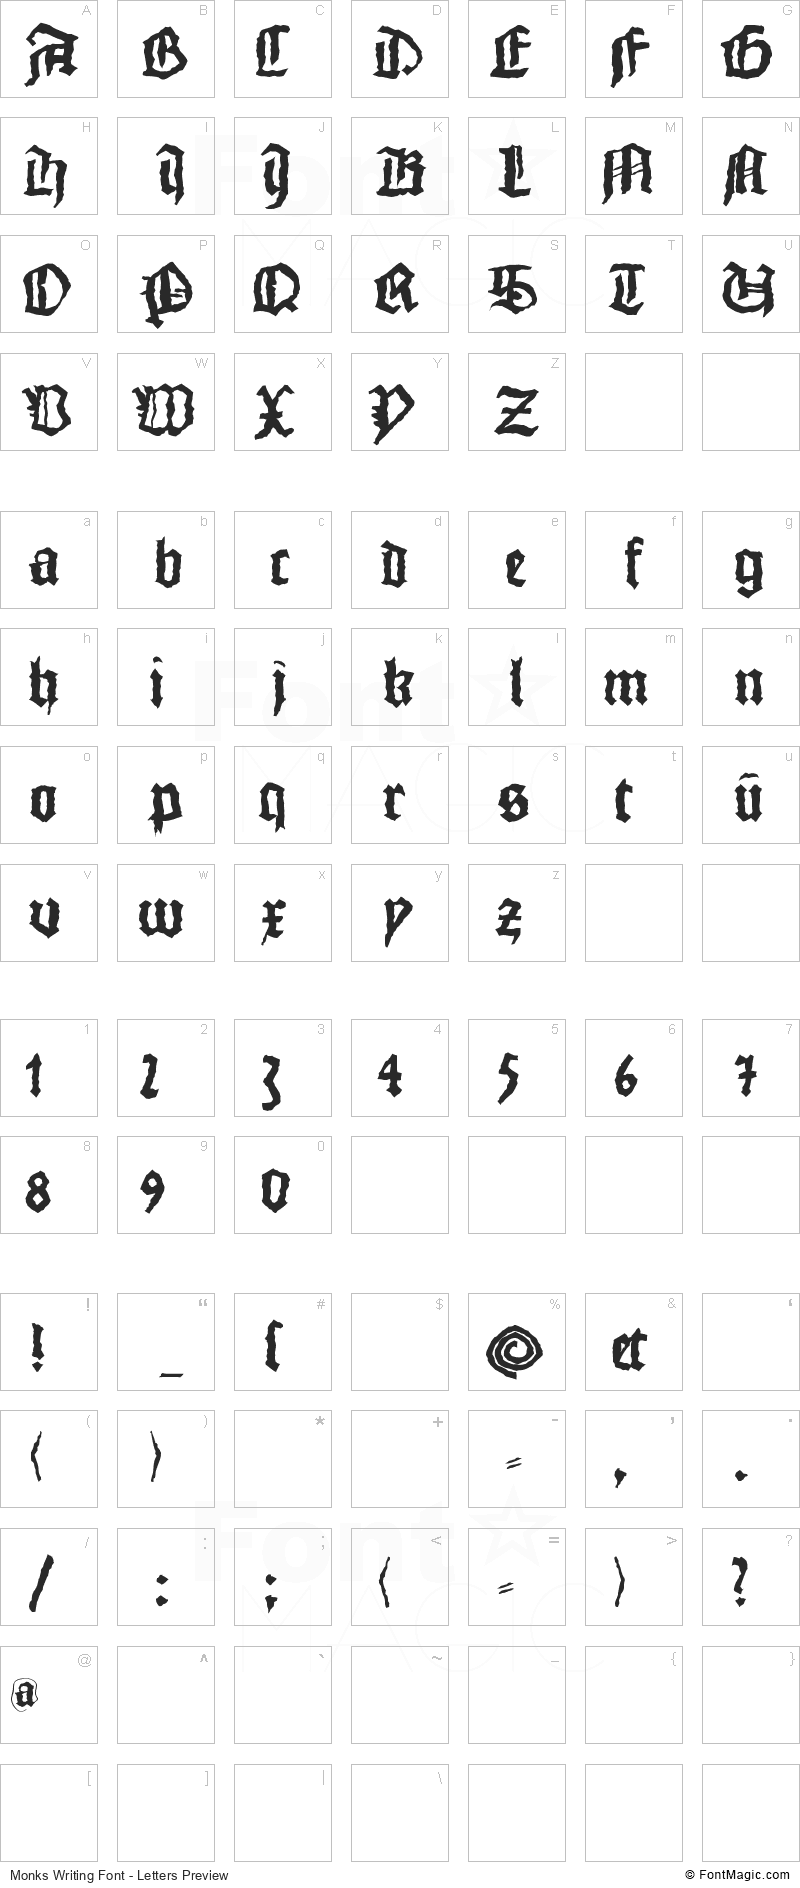 Monks Writing Font - All Latters Preview Chart